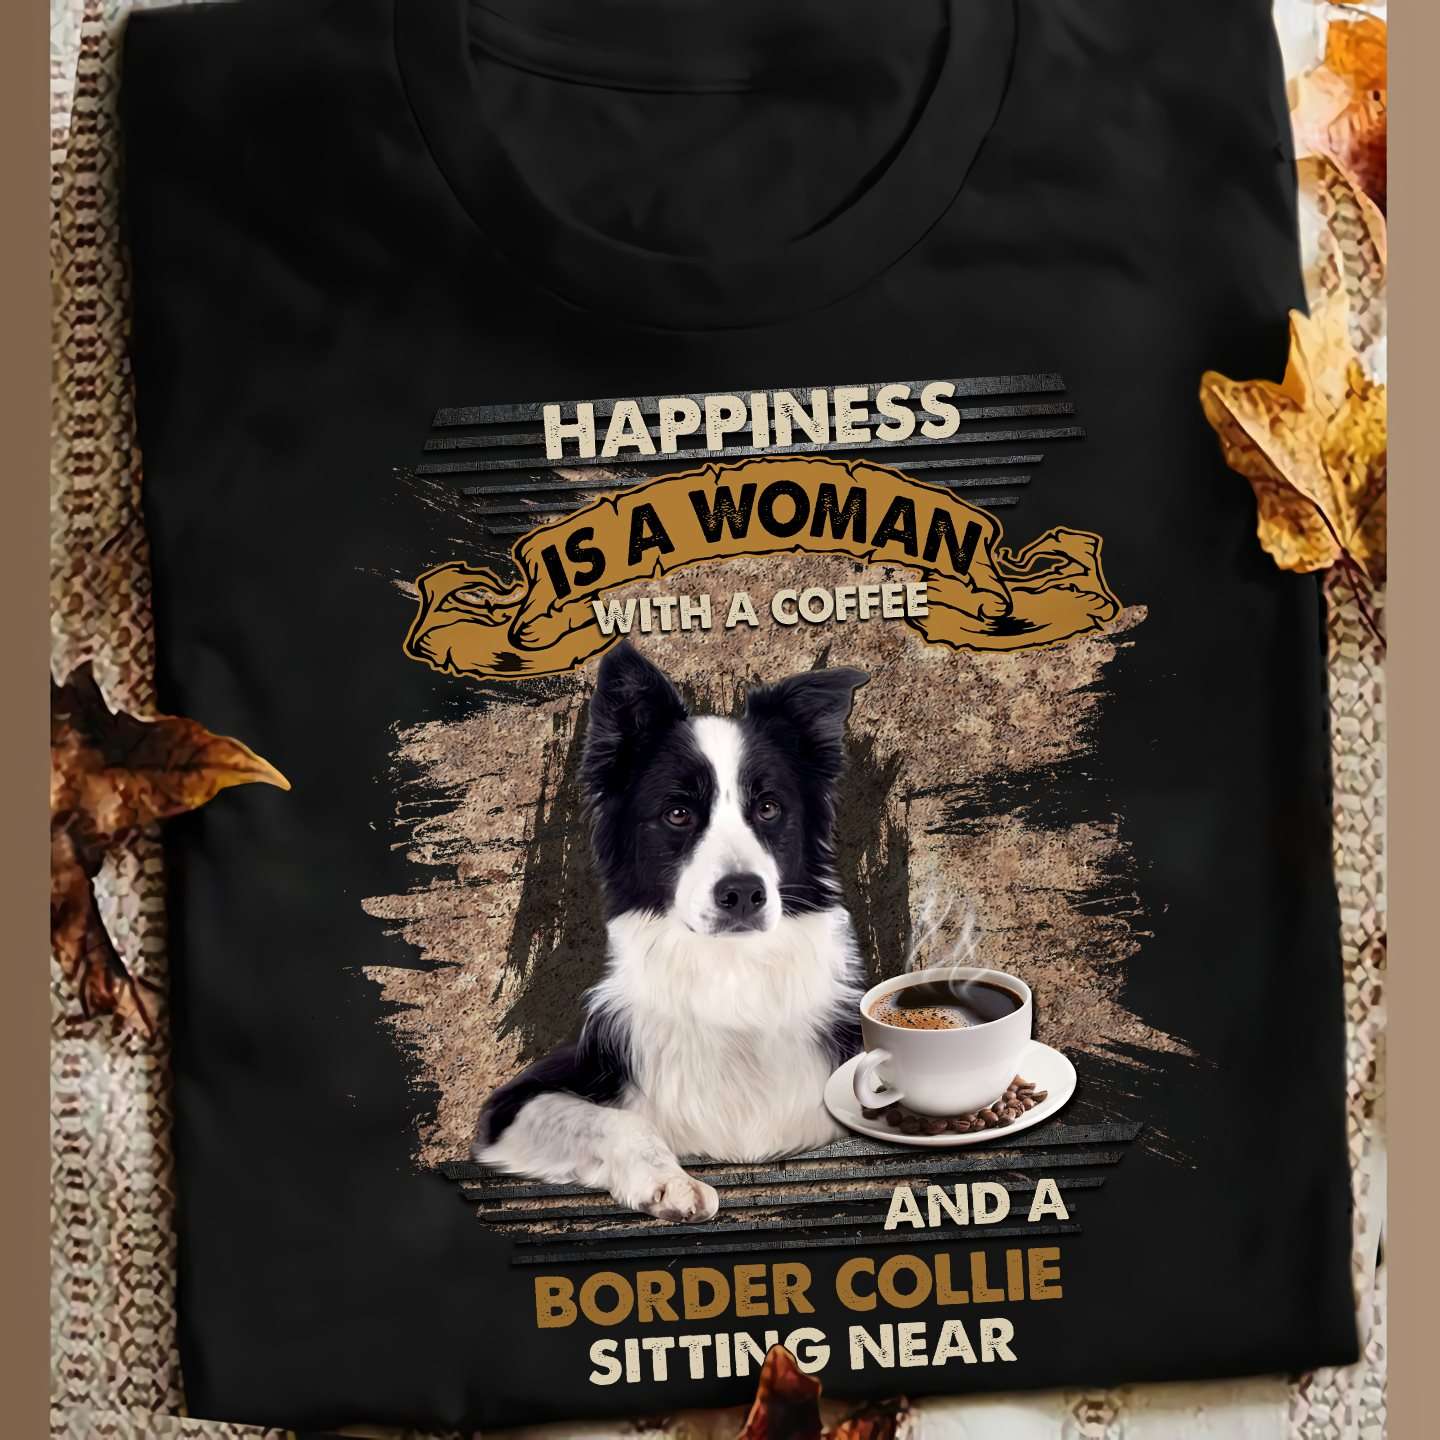 Border Collie Coffee - Happiness is a woman with a coffee and a border collie sitting near